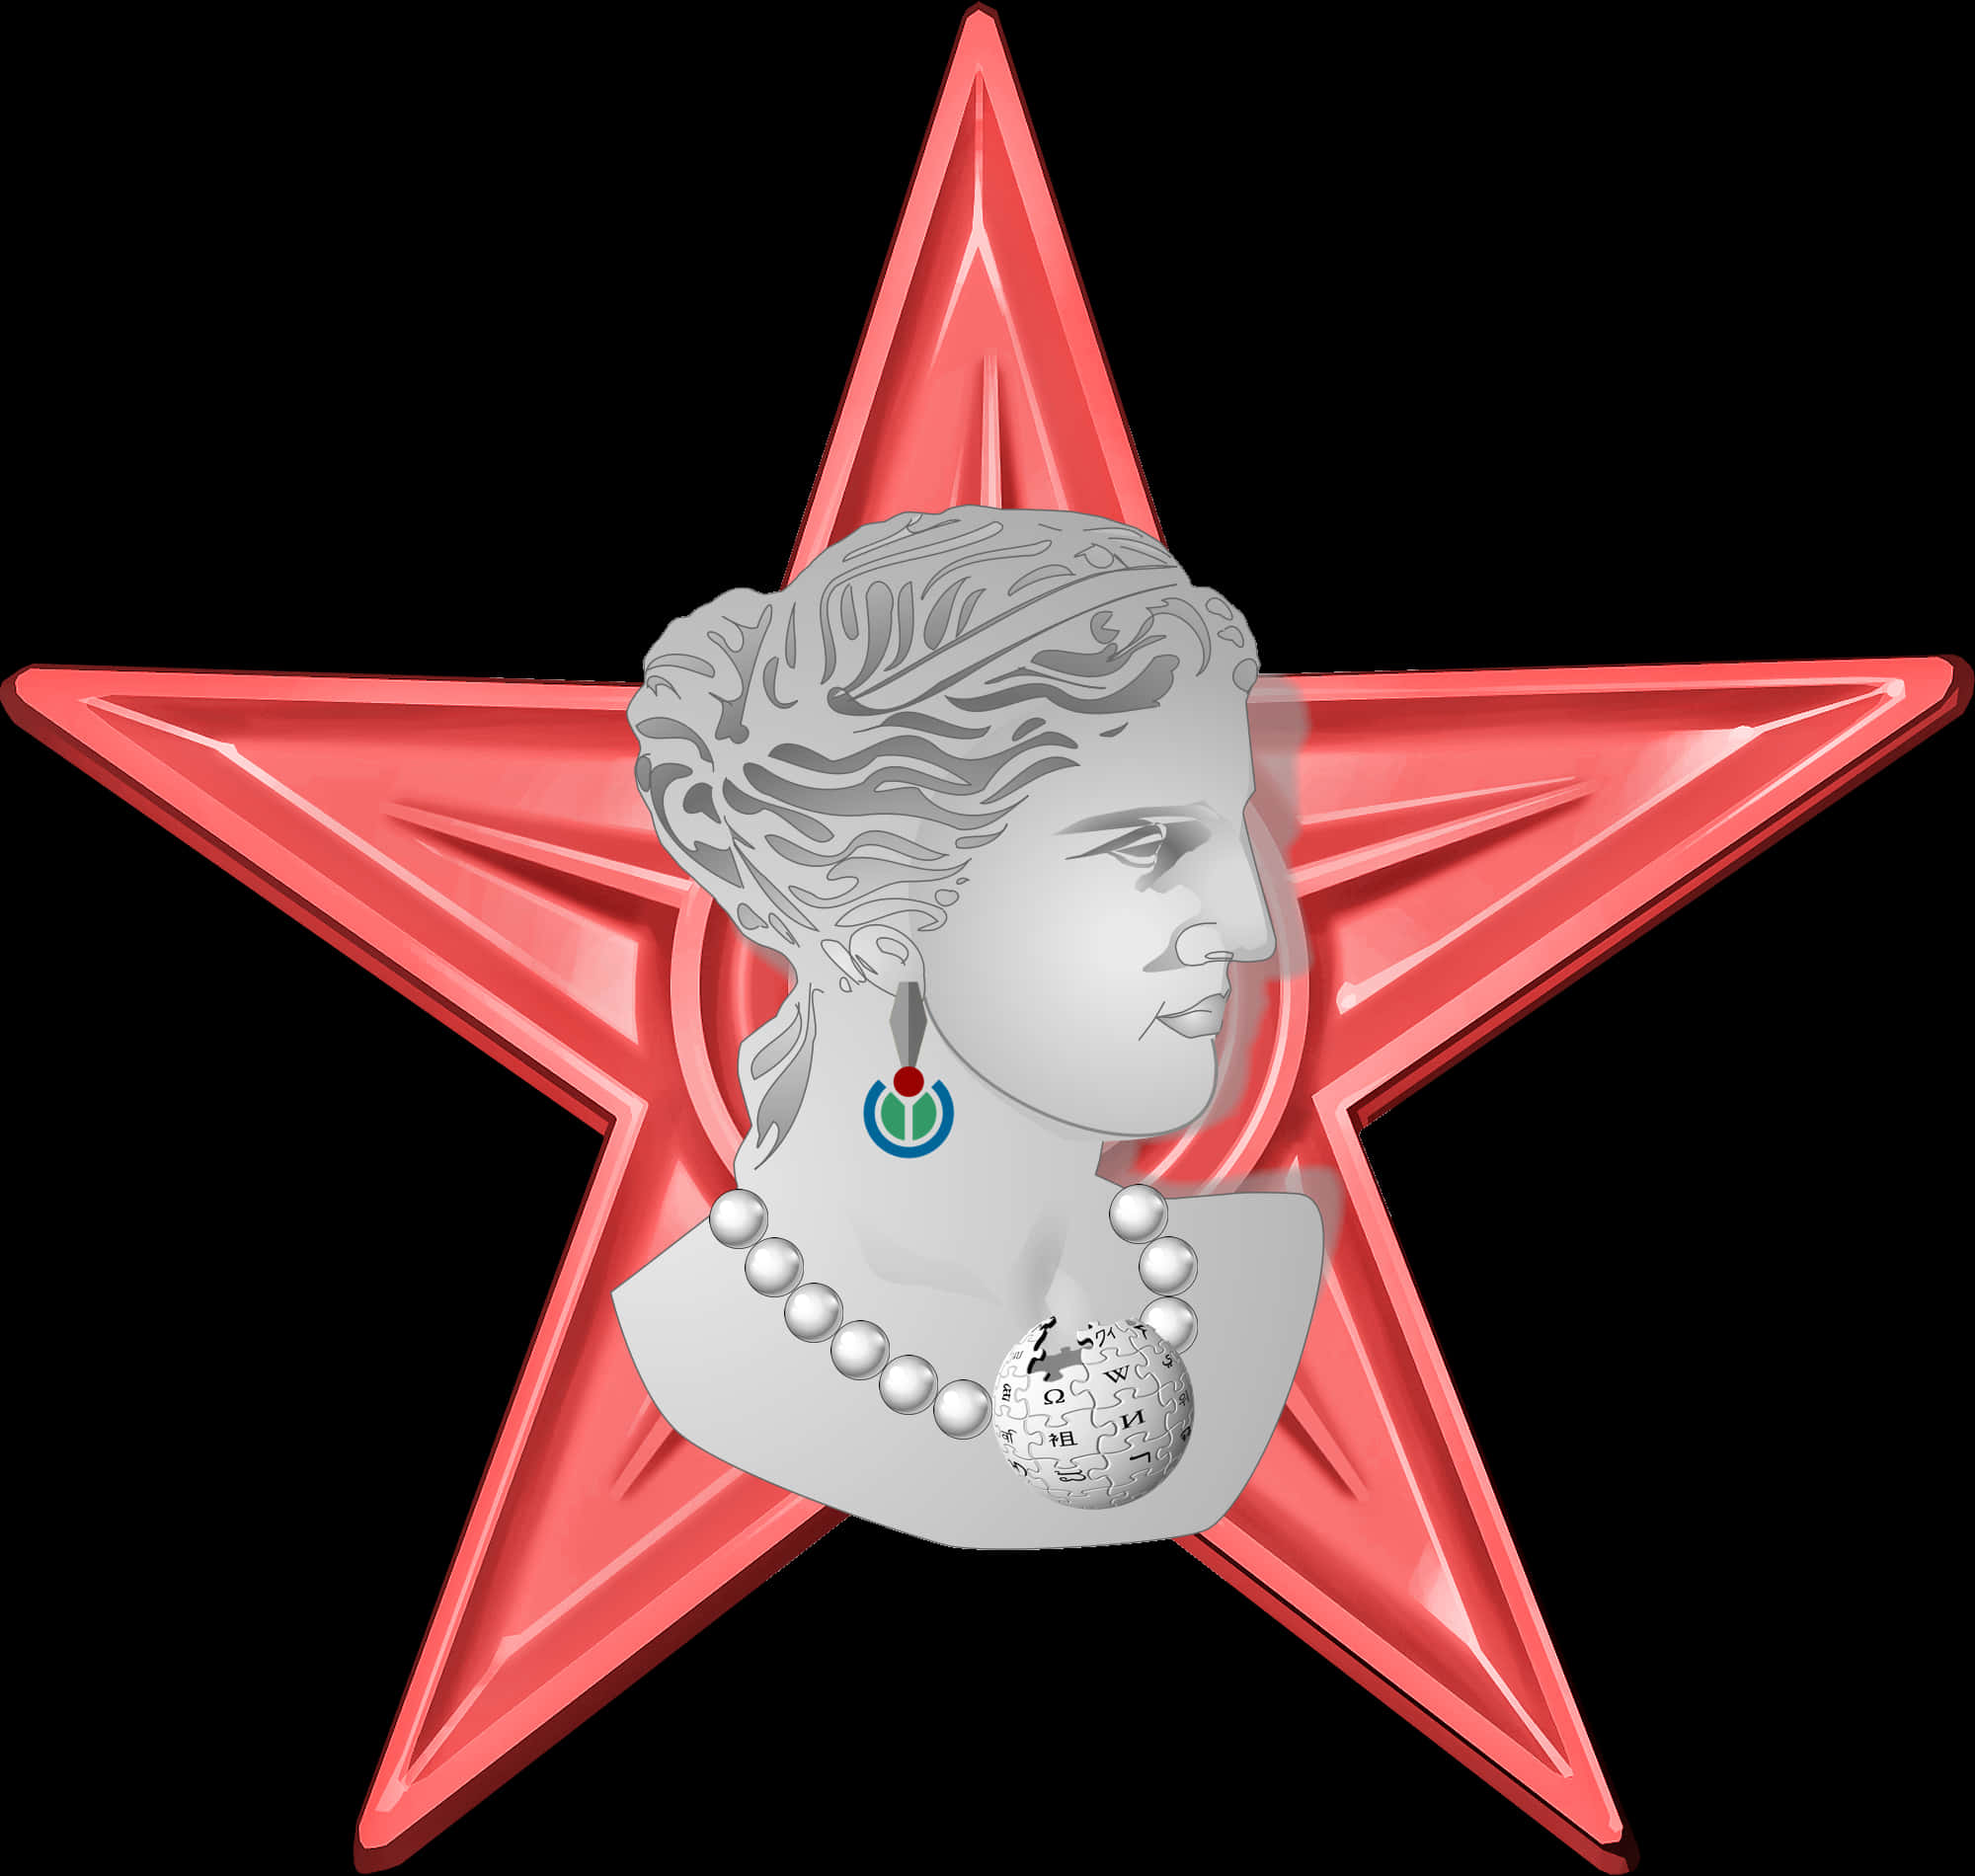 A Red Star With A Head Of A Woman